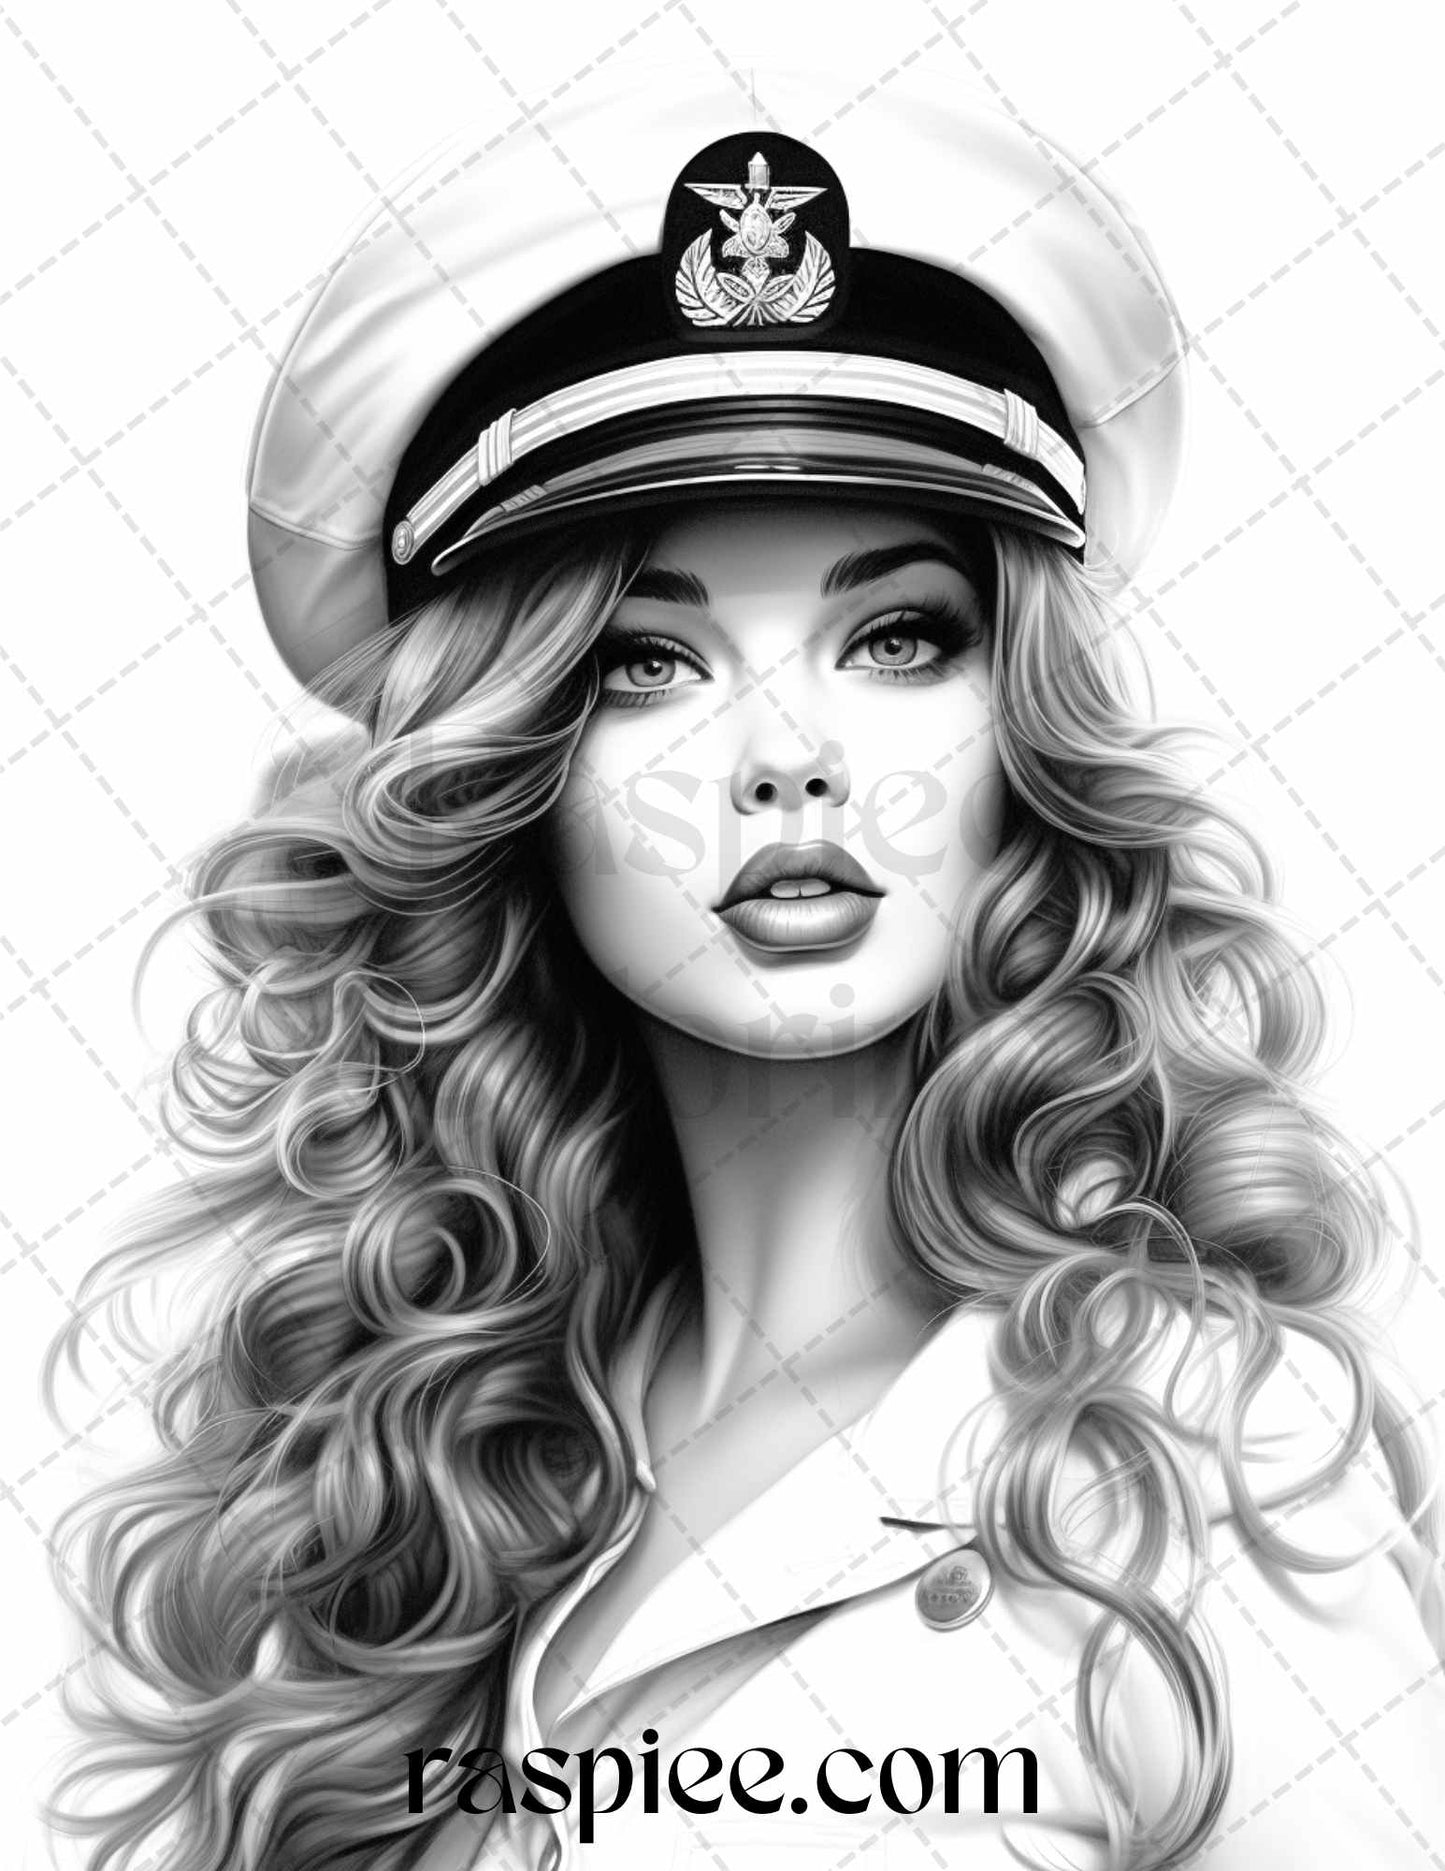 40 Sailor Pin Up Girls Grayscale Coloring Pages Printable for Adults, PDF File Instant Download - raspiee